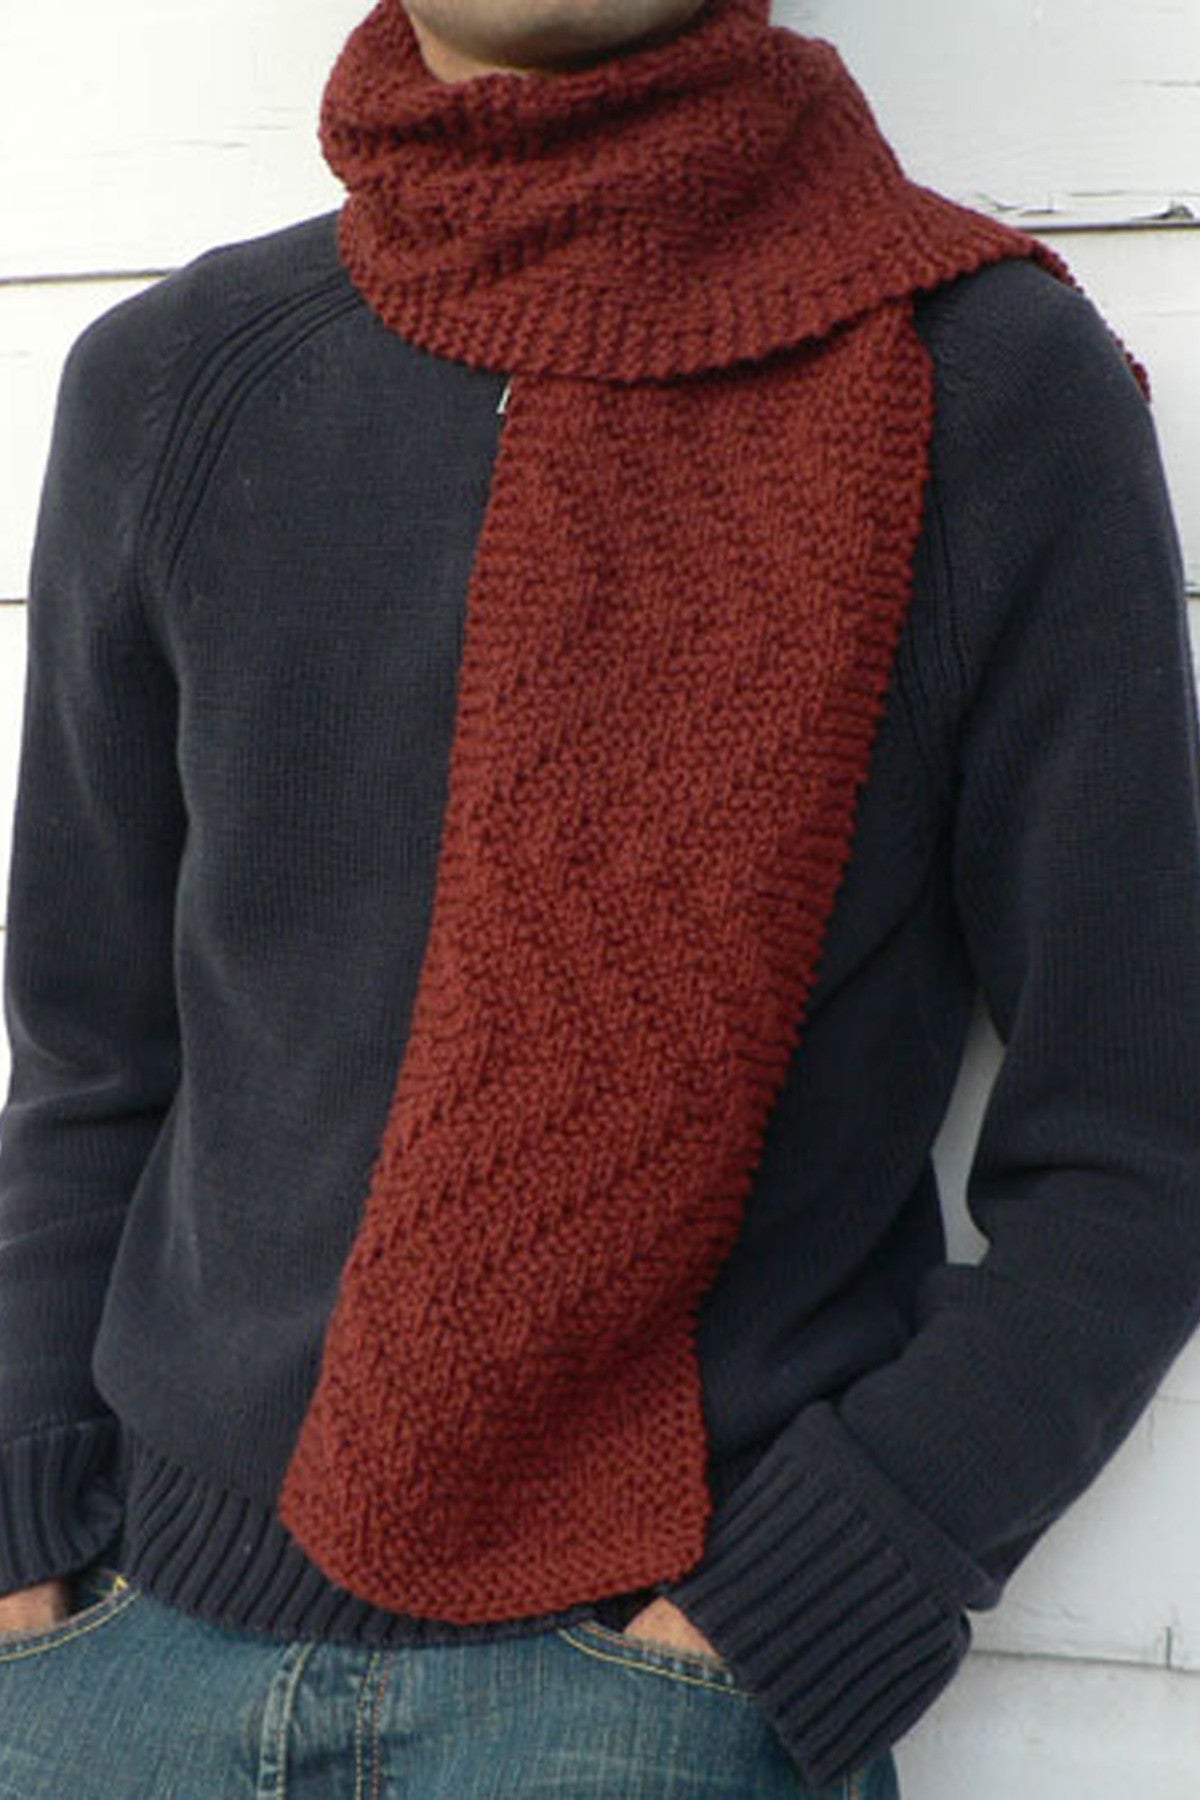 Rambler's Scarf with textured zig-zag knitting pattern for men.